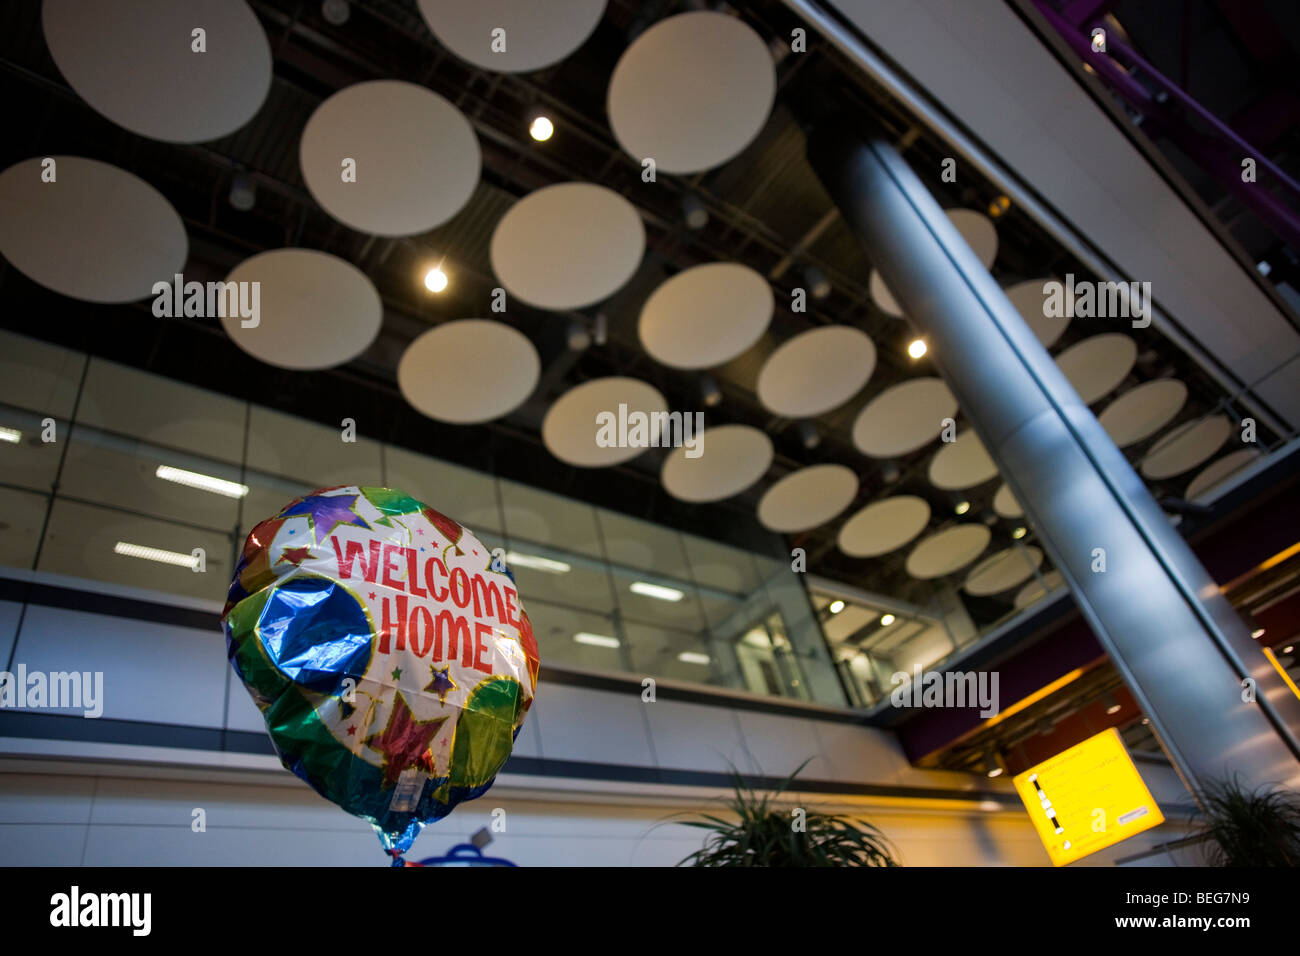 A helium-filled Welcome Home balloon of a family waiting for loved-ones floats in the air in Heathrow Airport's T5 Stock Photo